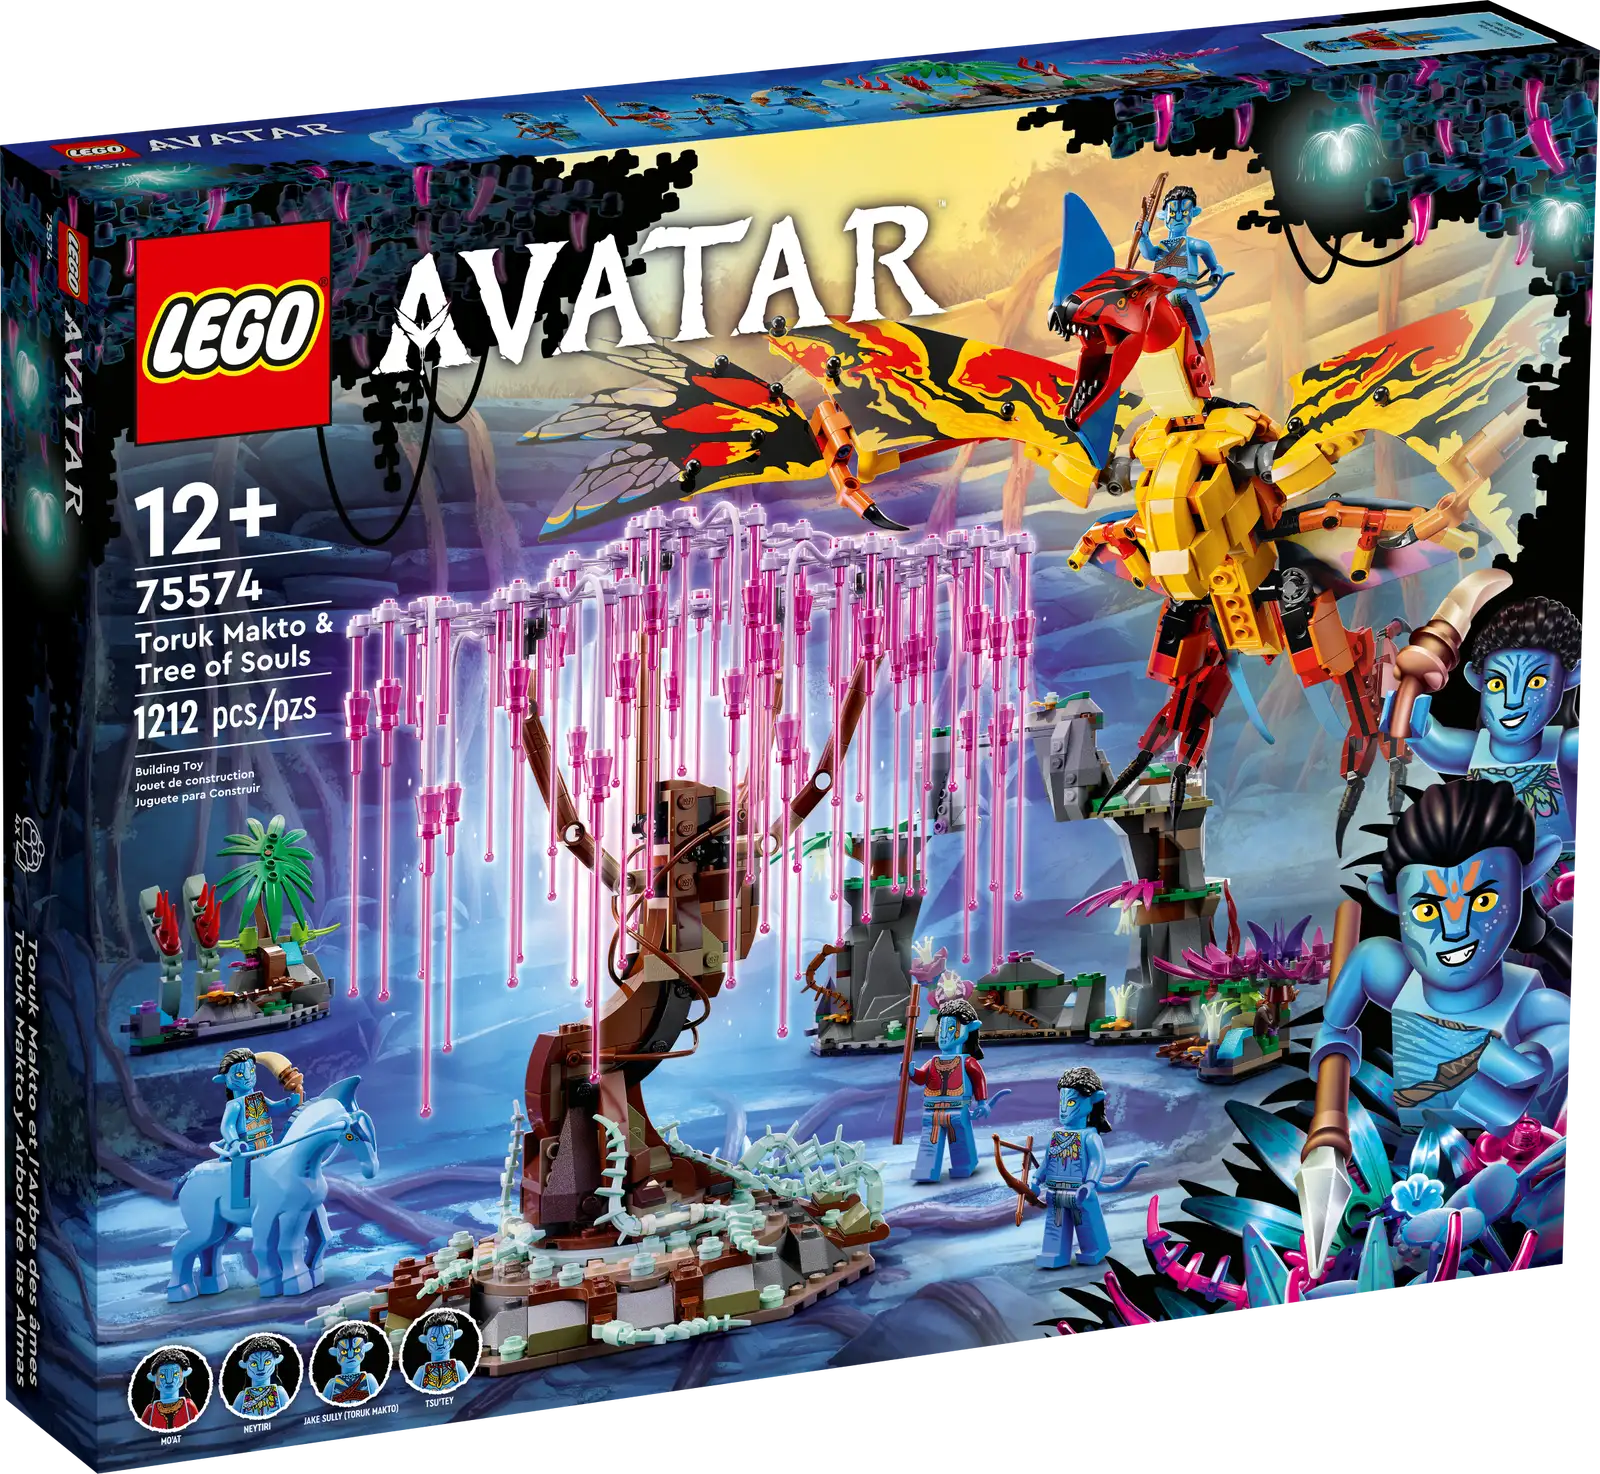 Help a kid aged 12+ who loves science fiction animal trends with this LEGO® Avatar Toruk Makto & Tree of Souls (75574) building toy set. The set includes Jake Sully, Neytiri, Mo’at and Tsu’Tey Na’vi minifigures, a posable Toruk figure with foil wings, Direhorse figure and a buildable Tree of Souls, plus 3 environment builds with glow-in-the-dark elements. Impactful Avatar story Expand a child’s passion for the movie with a toy set featuring an iconic location that lets kids replay known scenes or create new ideas independently or as part of a great family moment. Mix and collect sets (sold separately) to build endless versions of Pandora. Discover focused joy With well-known characters and unique creatures and locations, LEGO Avatar sets offer varied story and play options. The models also look great on display, with a detailed environment build made for posing the creatures. Older kids and fans can enjoy a joyful focus as they rediscover the vibrant universe. Endless stories – Any Avatar fan or kid aged 12 and up will be proud to build and play with this LEGO® Avatar Toruk Makto & Tree of Souls (75574) toy set and revisit the unique world of Pandora What’s in the box – This LEGO® set includes 4 minifigures, Toruk and Direhorse animal figures with connectors, a buildable Tree of Souls and 3 environment scenes with glow-in-the-dark elements Display or play – Kids and Avatar fans can recreate a meaningful scene from the movie, design a new idea or set up a dynamic display with the Toruk spreading its foil wings over the Tree of Souls Explore facets of Pandora – Passionate fans can spend hours exploring Pandora on the back of a mighty Toruk or Direhorse figure and communing with the Na’vi people through the sacred Tree of Souls Detailed, creative models – The Toruk stands over 9.5 in. (24 cm) high and 15 in. (39 cm) wide without the wing foils; the Tree of Souls measures over 8.5 in. (22 cm) high and 9 in. (23 cm) wide 3 instruction booklets – This and the other LEGO® Avatar sets are designed for social building, with 3 building instruction booklets so friends and families can co-build different parts of the set The world of Avatar – This and other collectible LEGO® Avatar sets (sold separately at different times) make fun holiday or birthday gifts for movie fans and inspire open play for kids of all ages High quality – LEGO® building pieces and sets meet exacting quality standards that ensure they are consistent, compatible and work every time: it’s been that way since 1958 Safety first – LEGO® pieces are tested to ensure that every building toy set meets strict safety standards, ensuring this Avatar set is sturdy, reliable and ready for independent play and fun